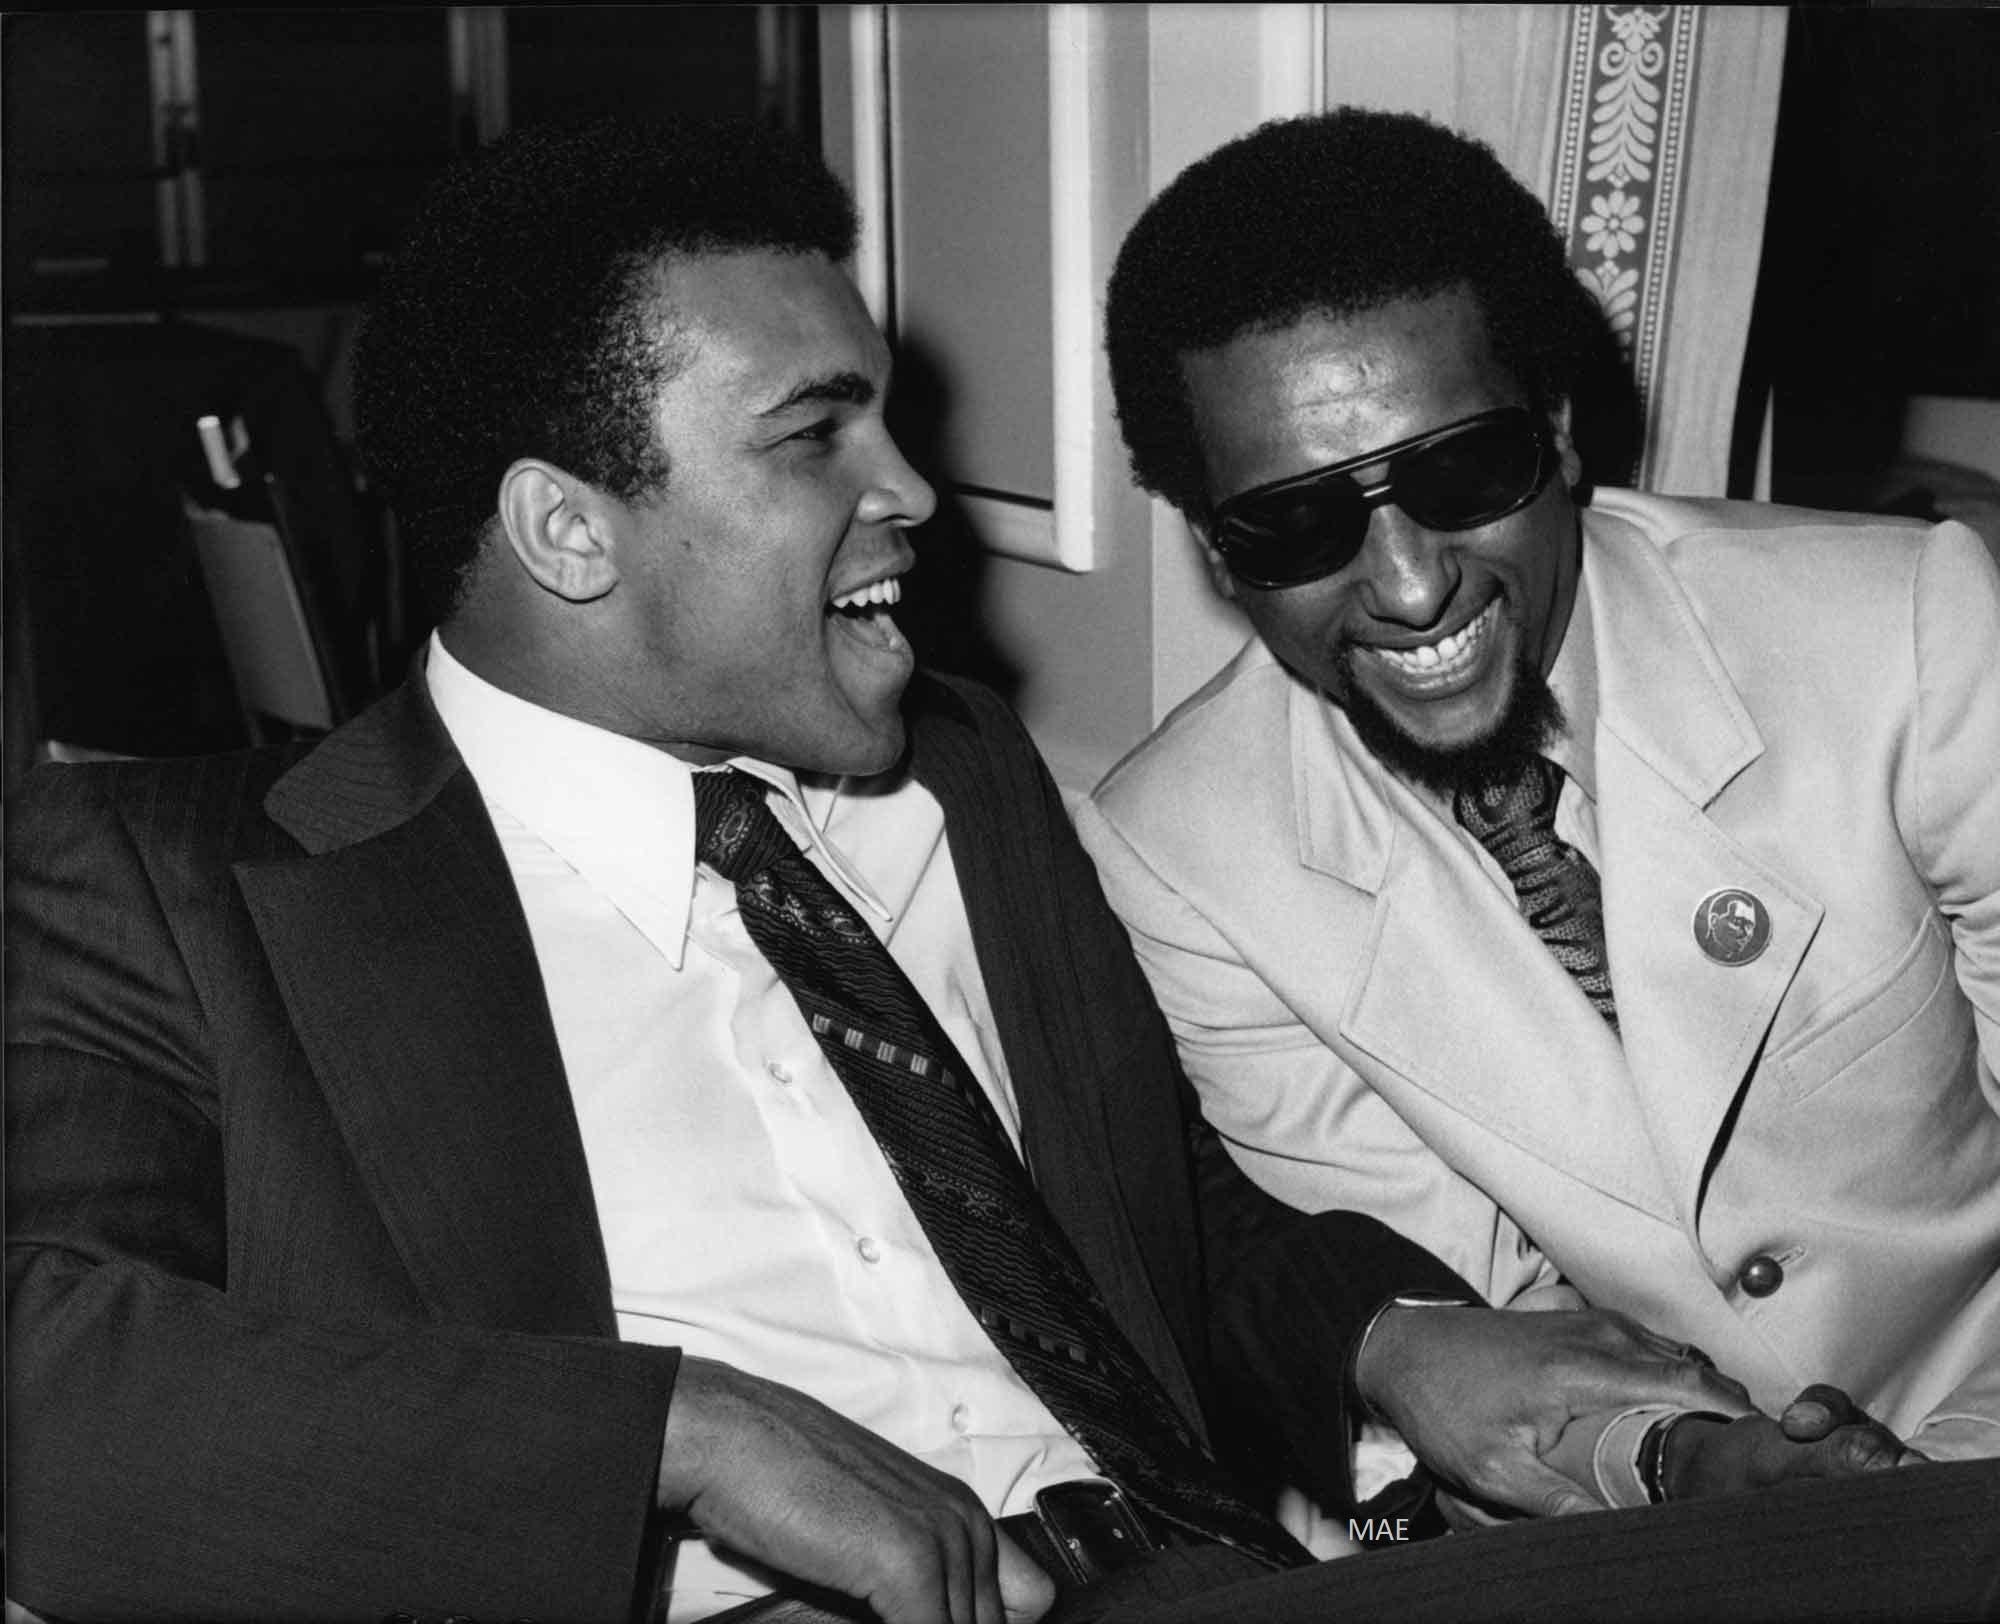 Icons & People - Muhammad Ali, Stokely Carmichael, Los Angeles, 1973 Print Later